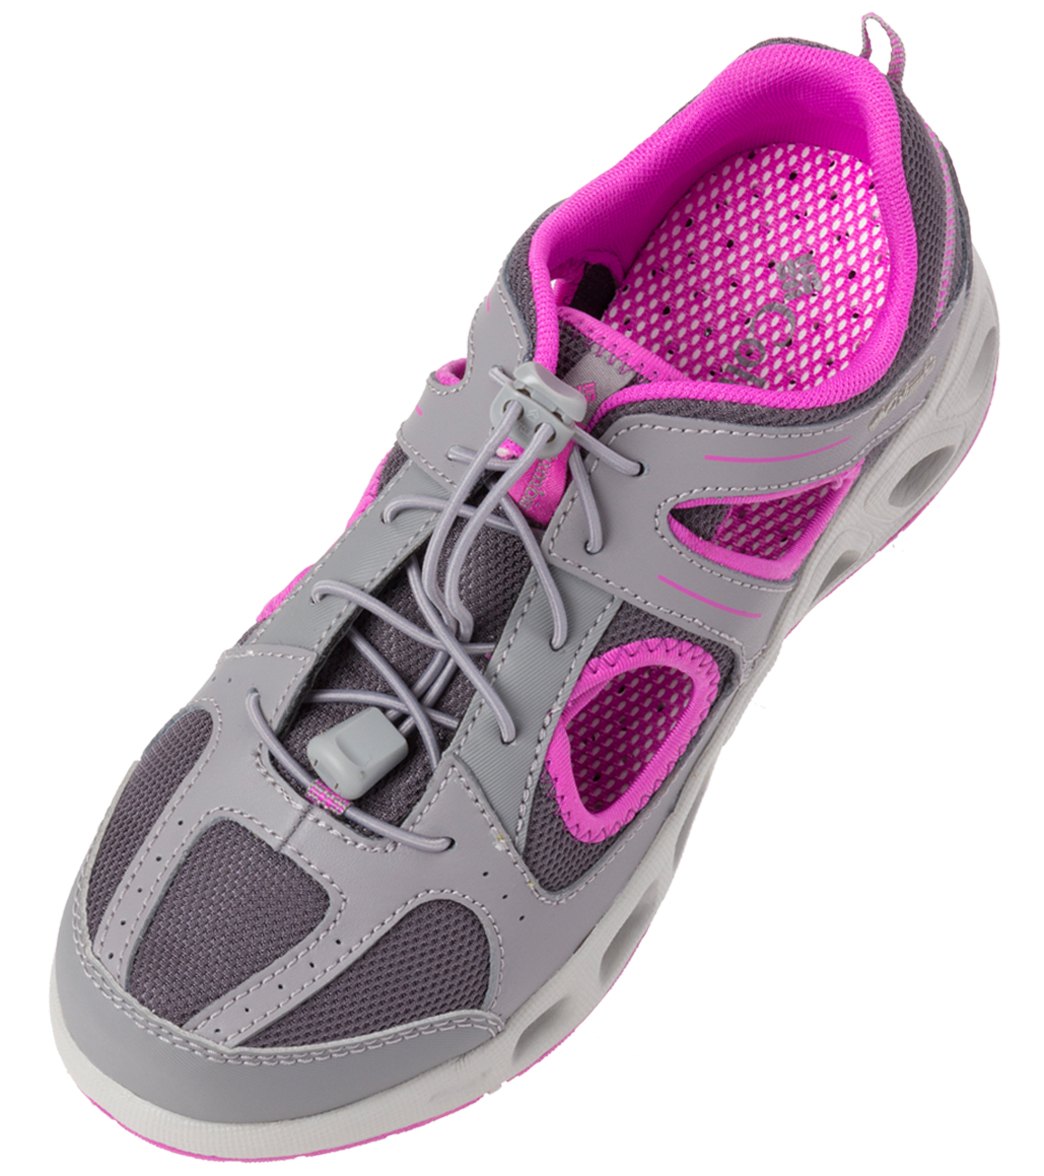 Columbia Youth Supervent Water Shoe - Shale/Foxglove 7 Leather/Rubber - Swimoutlet.com